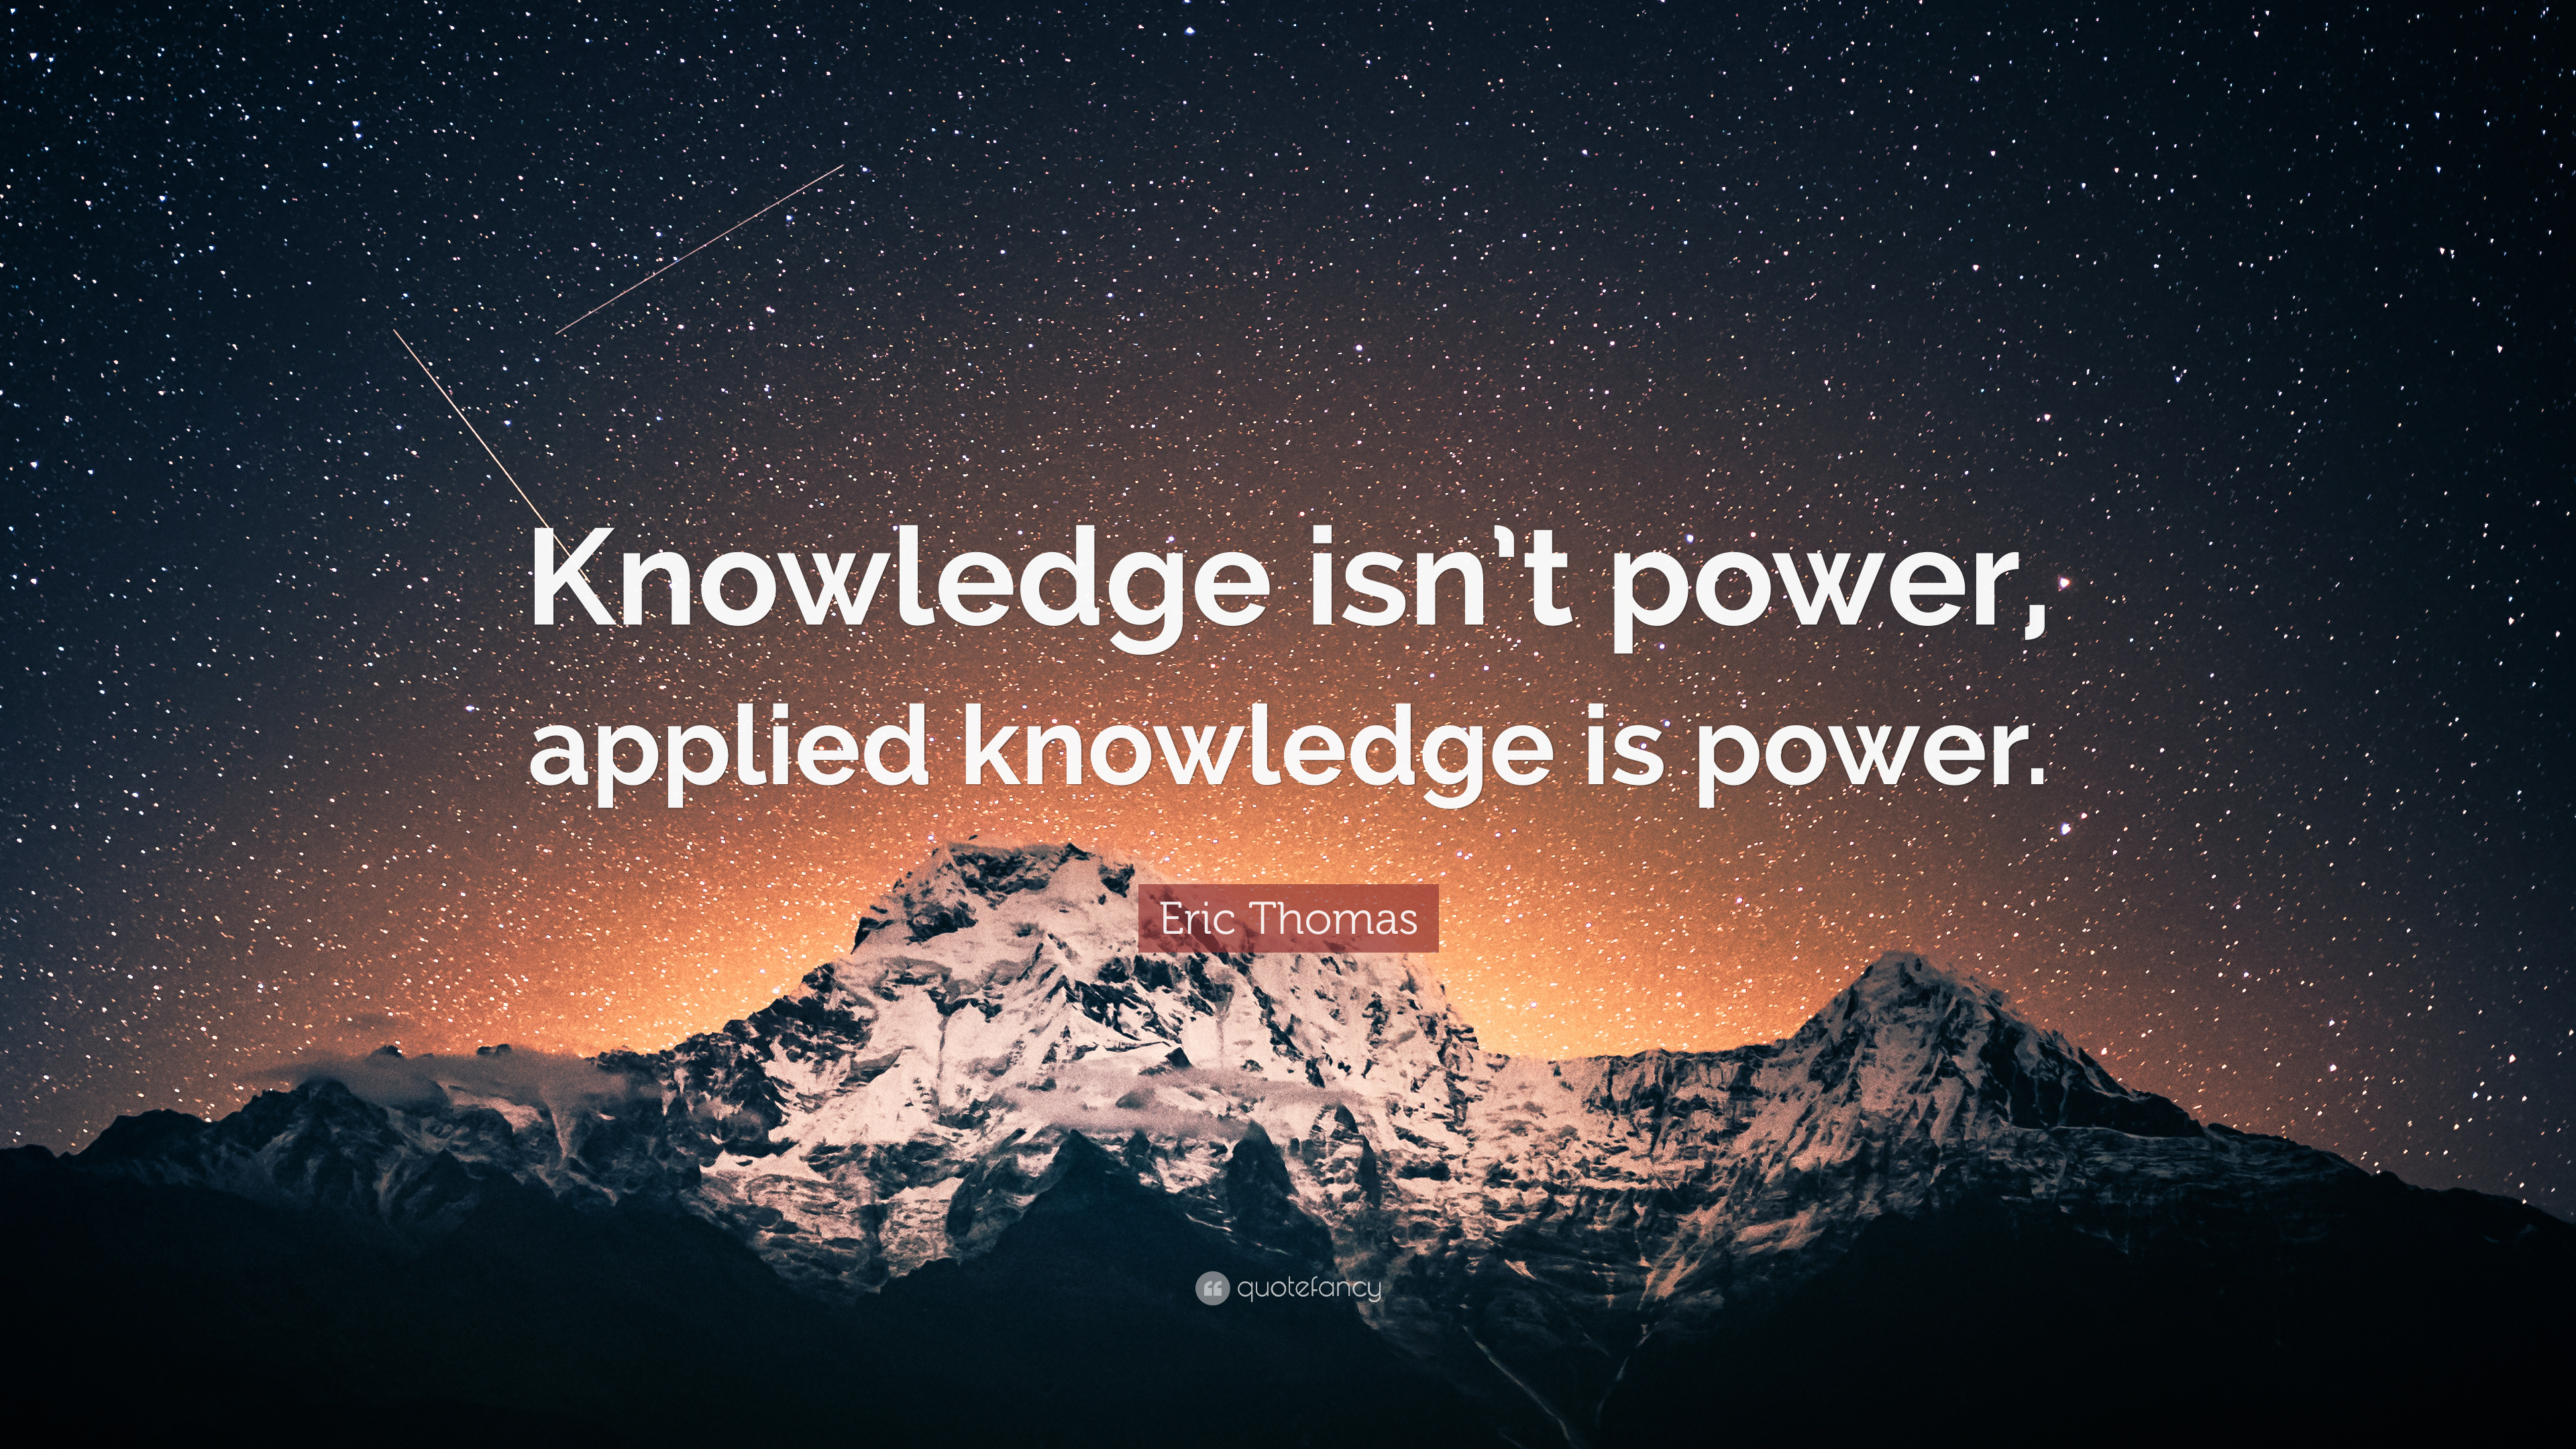 Eric Thomas Quote: “Knowledge isn't power, applied knowledge is power.”